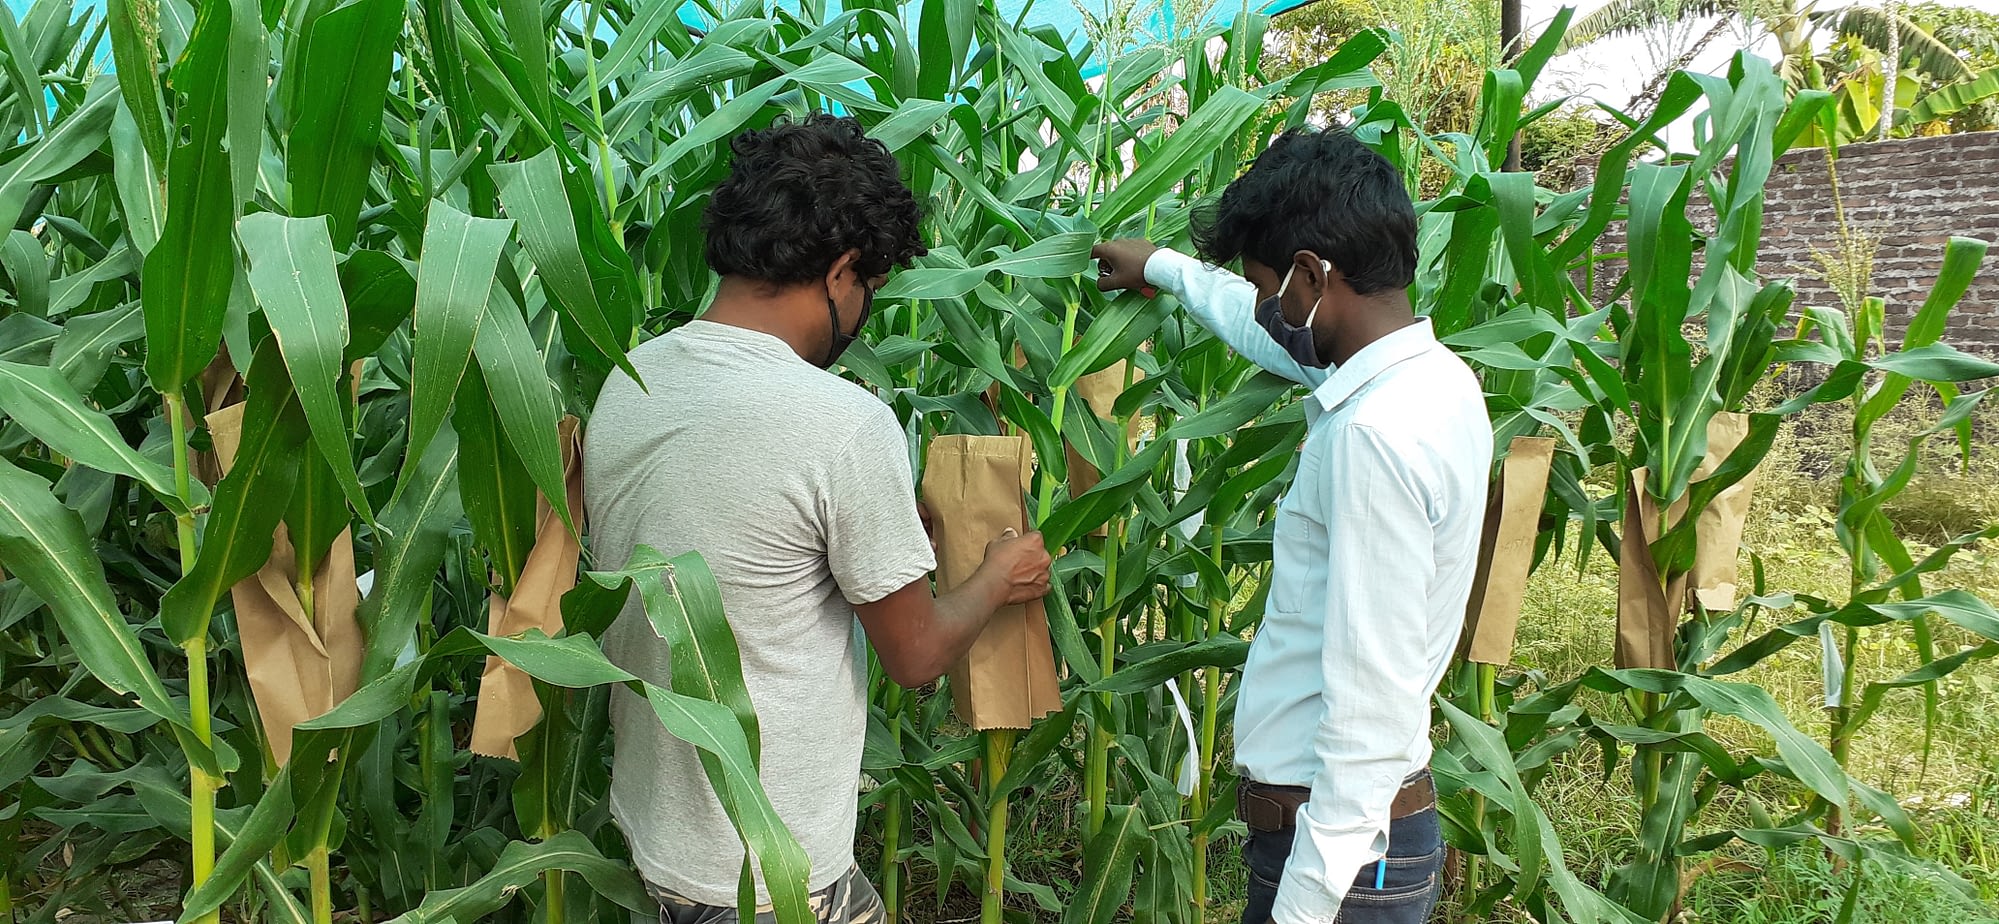 Private seed companies bag maize for selfing new maize product. (Photo: Arun Thapa/CIMMYT)